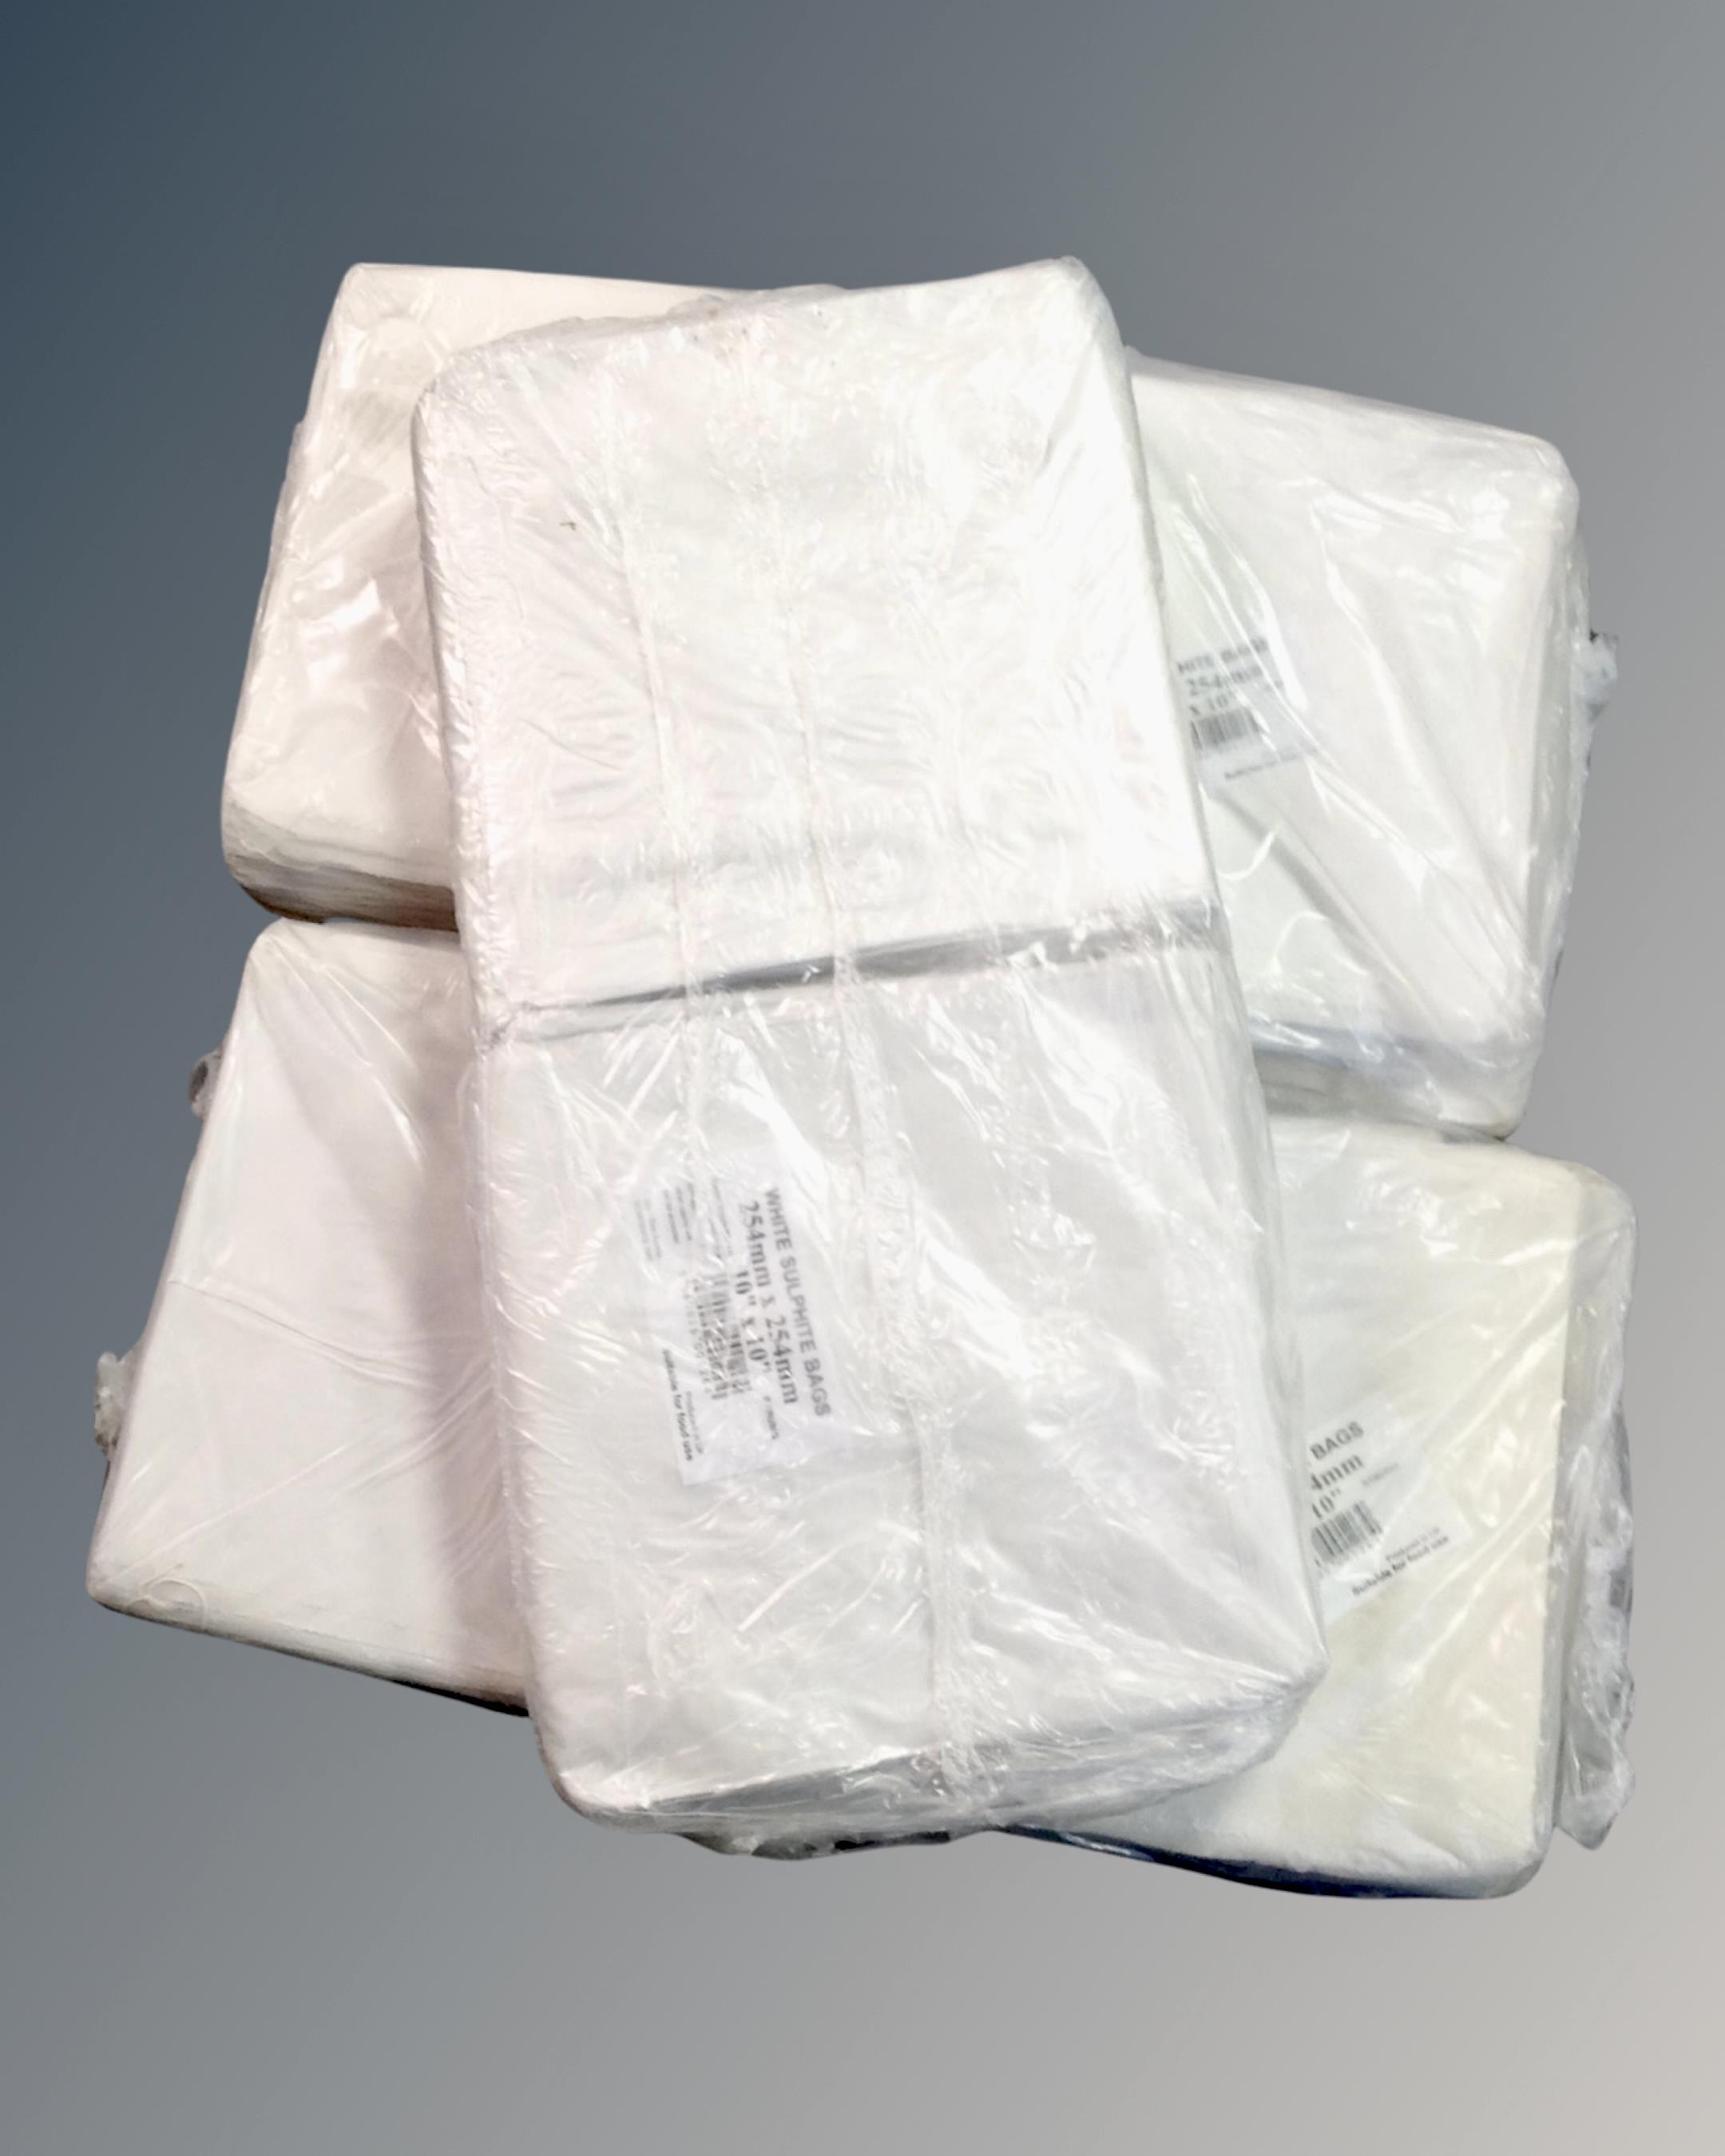 3000 254mm by 254mm white sulphate bags.